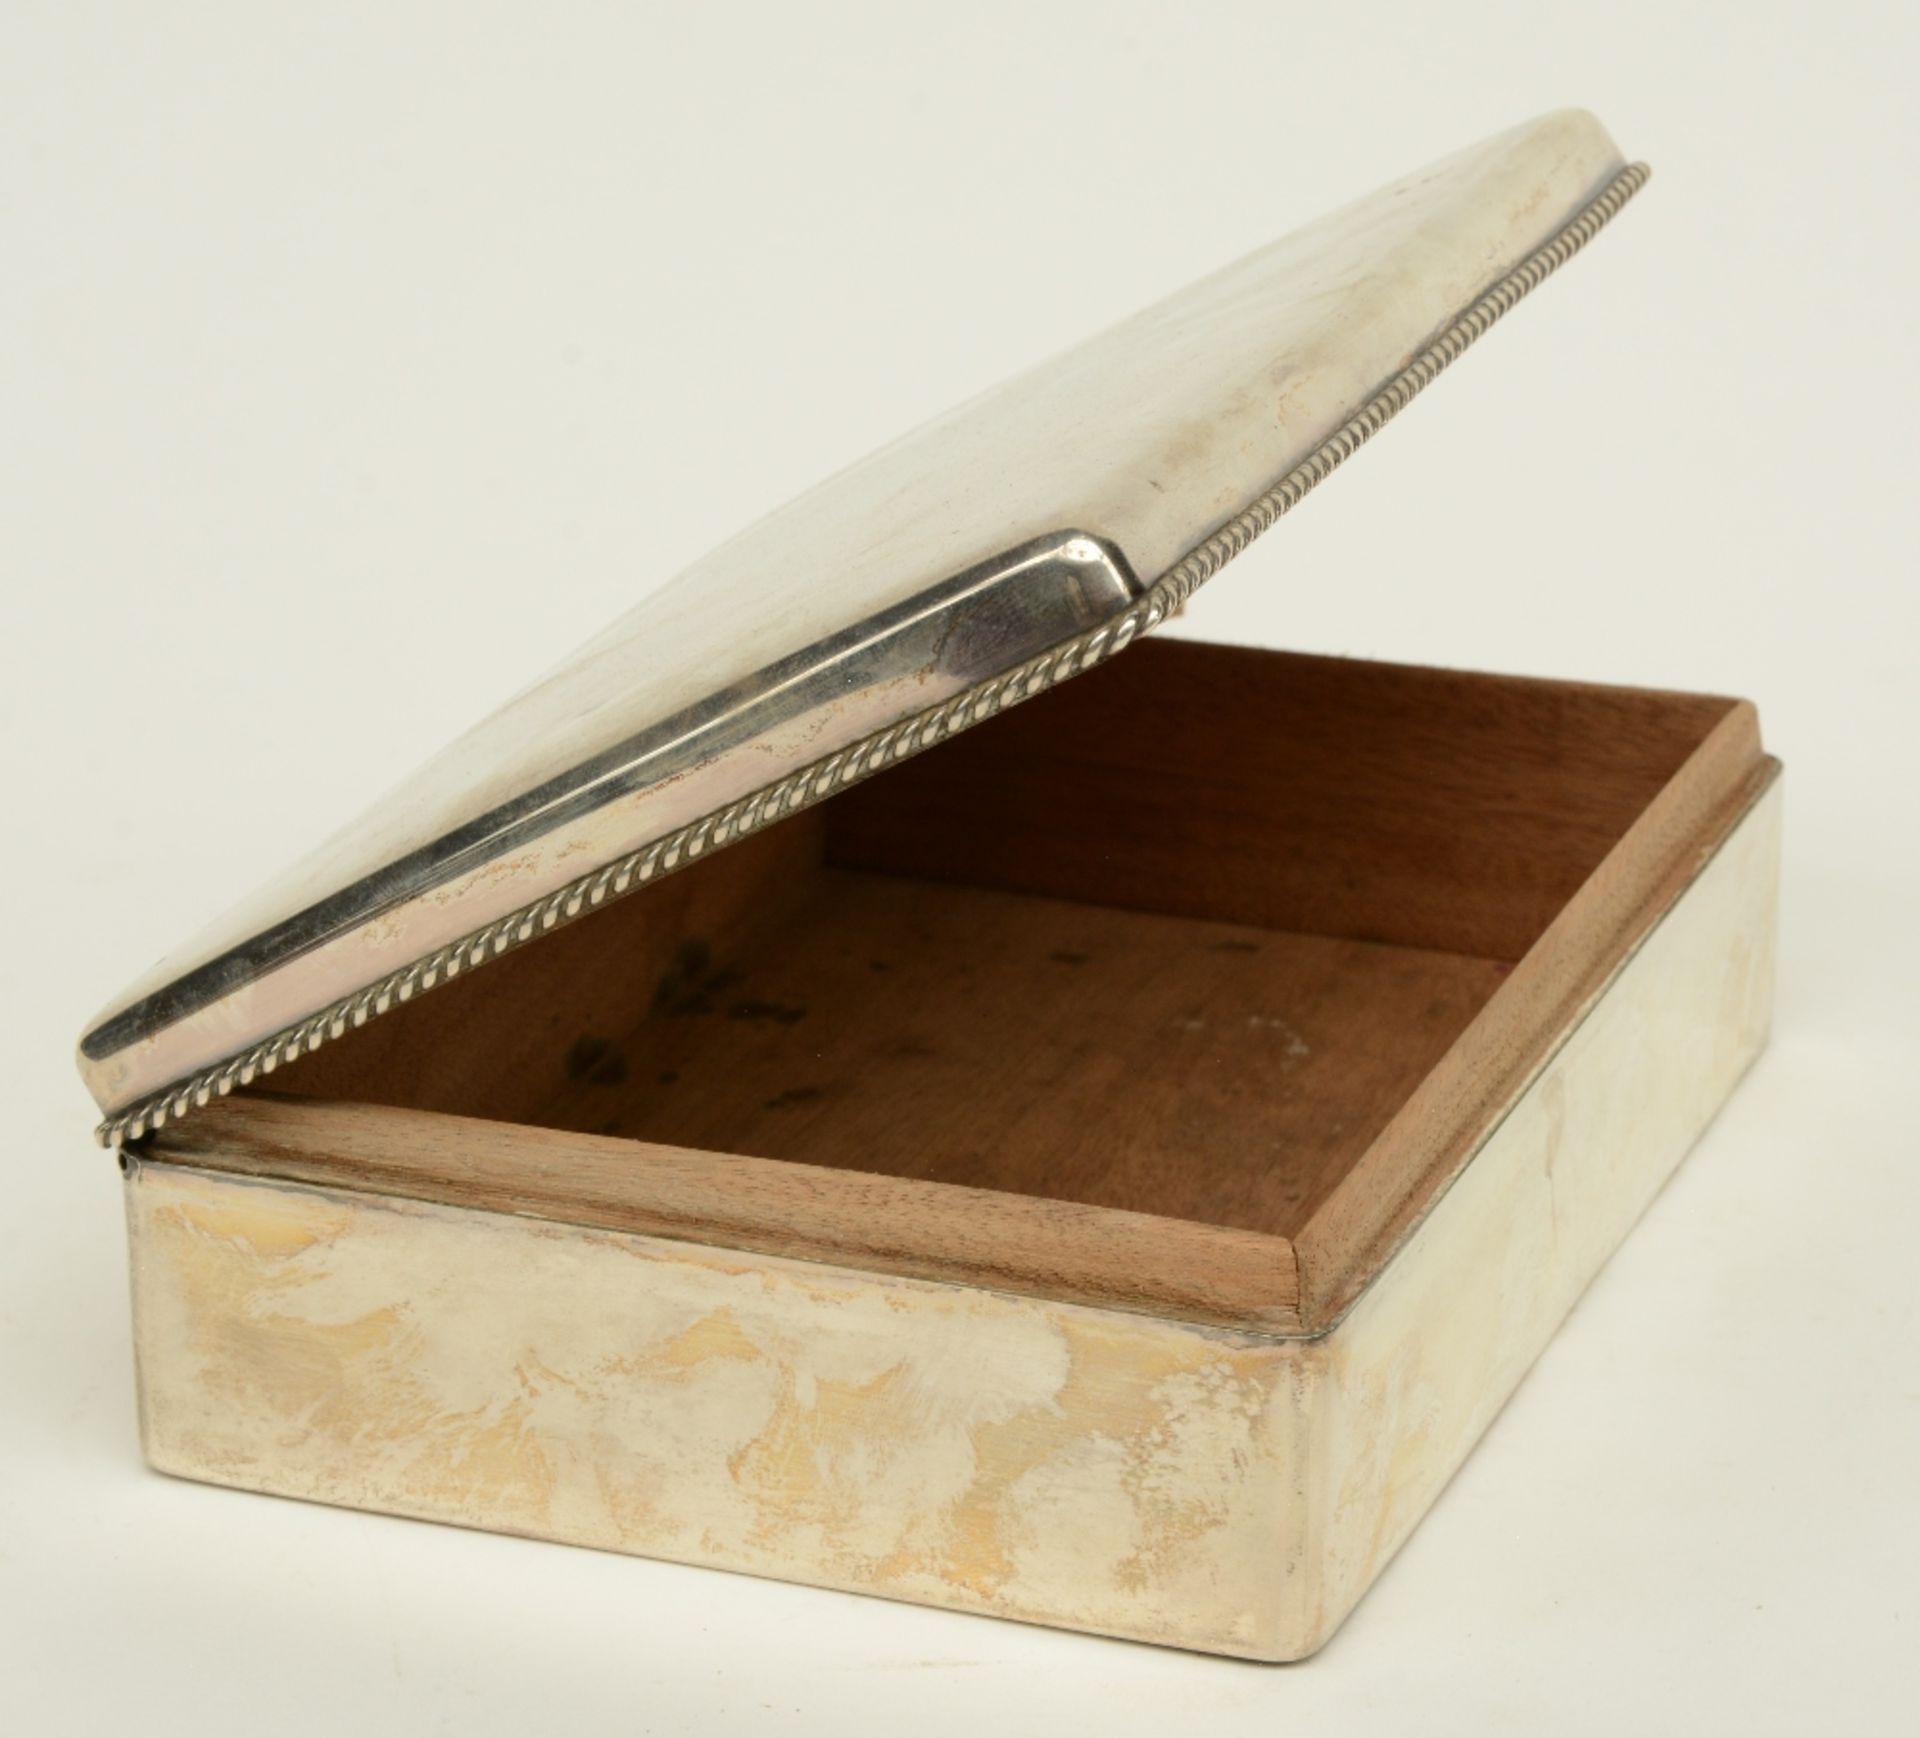 An early 20thC silver cigar box, 835/000, with a wooden inside, H 5,5 - W 18,5 - D 13,5 cm, Total